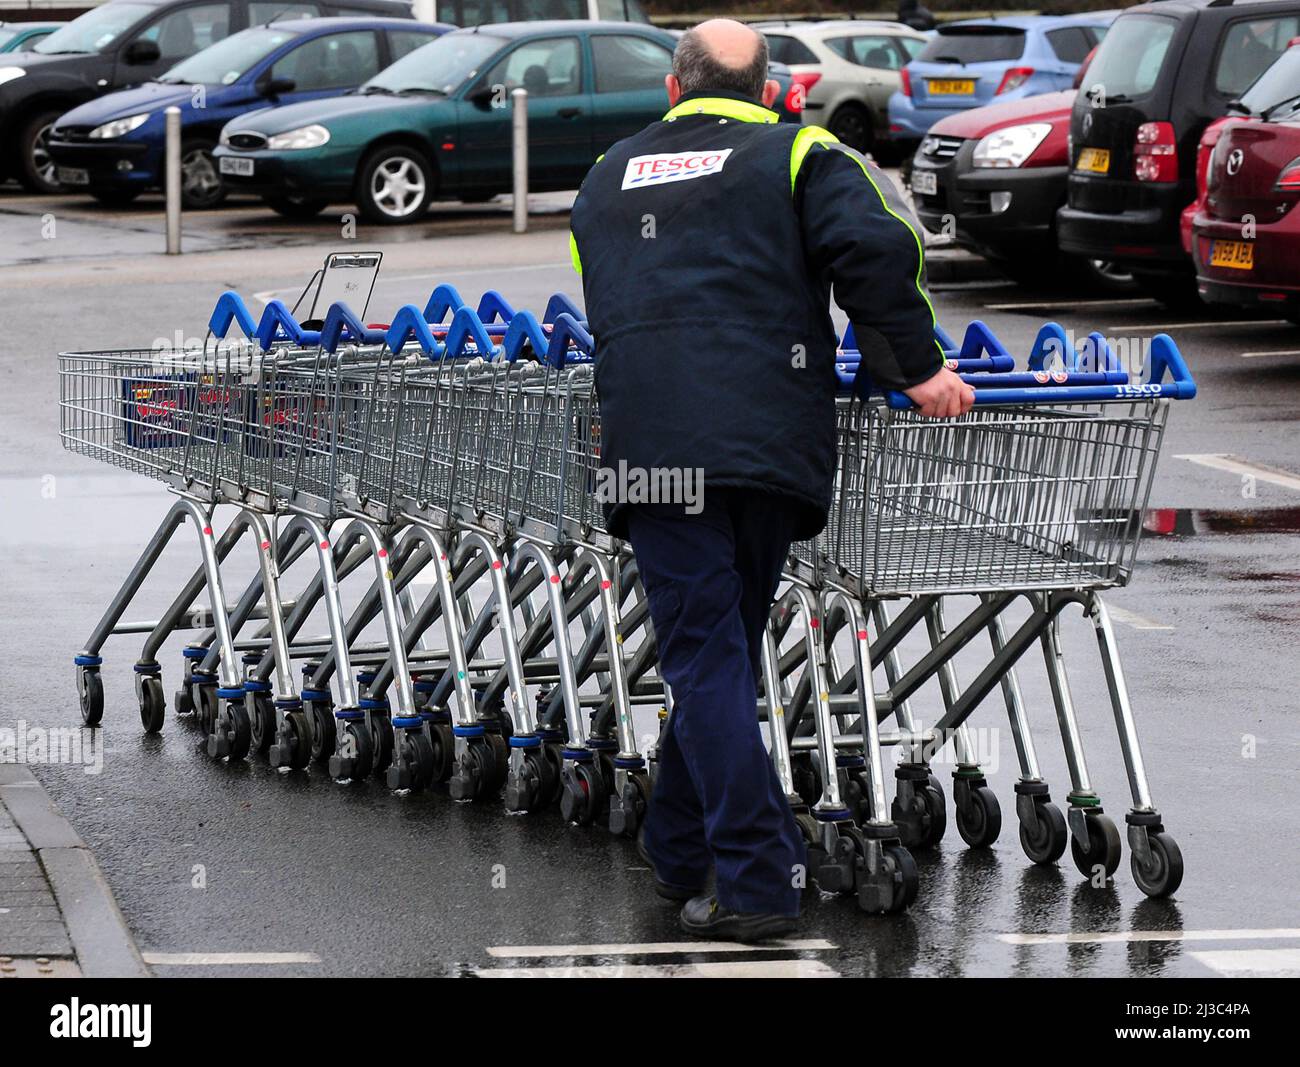 File photo dated 31/12/13 of a Tesco employee collecting trolleys at a Tesco store in Burton On Trent, as Tesco has said that its hourly pay for shop staff and warehouse workers will be increased by 5.8% from £9.55 to £10.10. Stock Photo